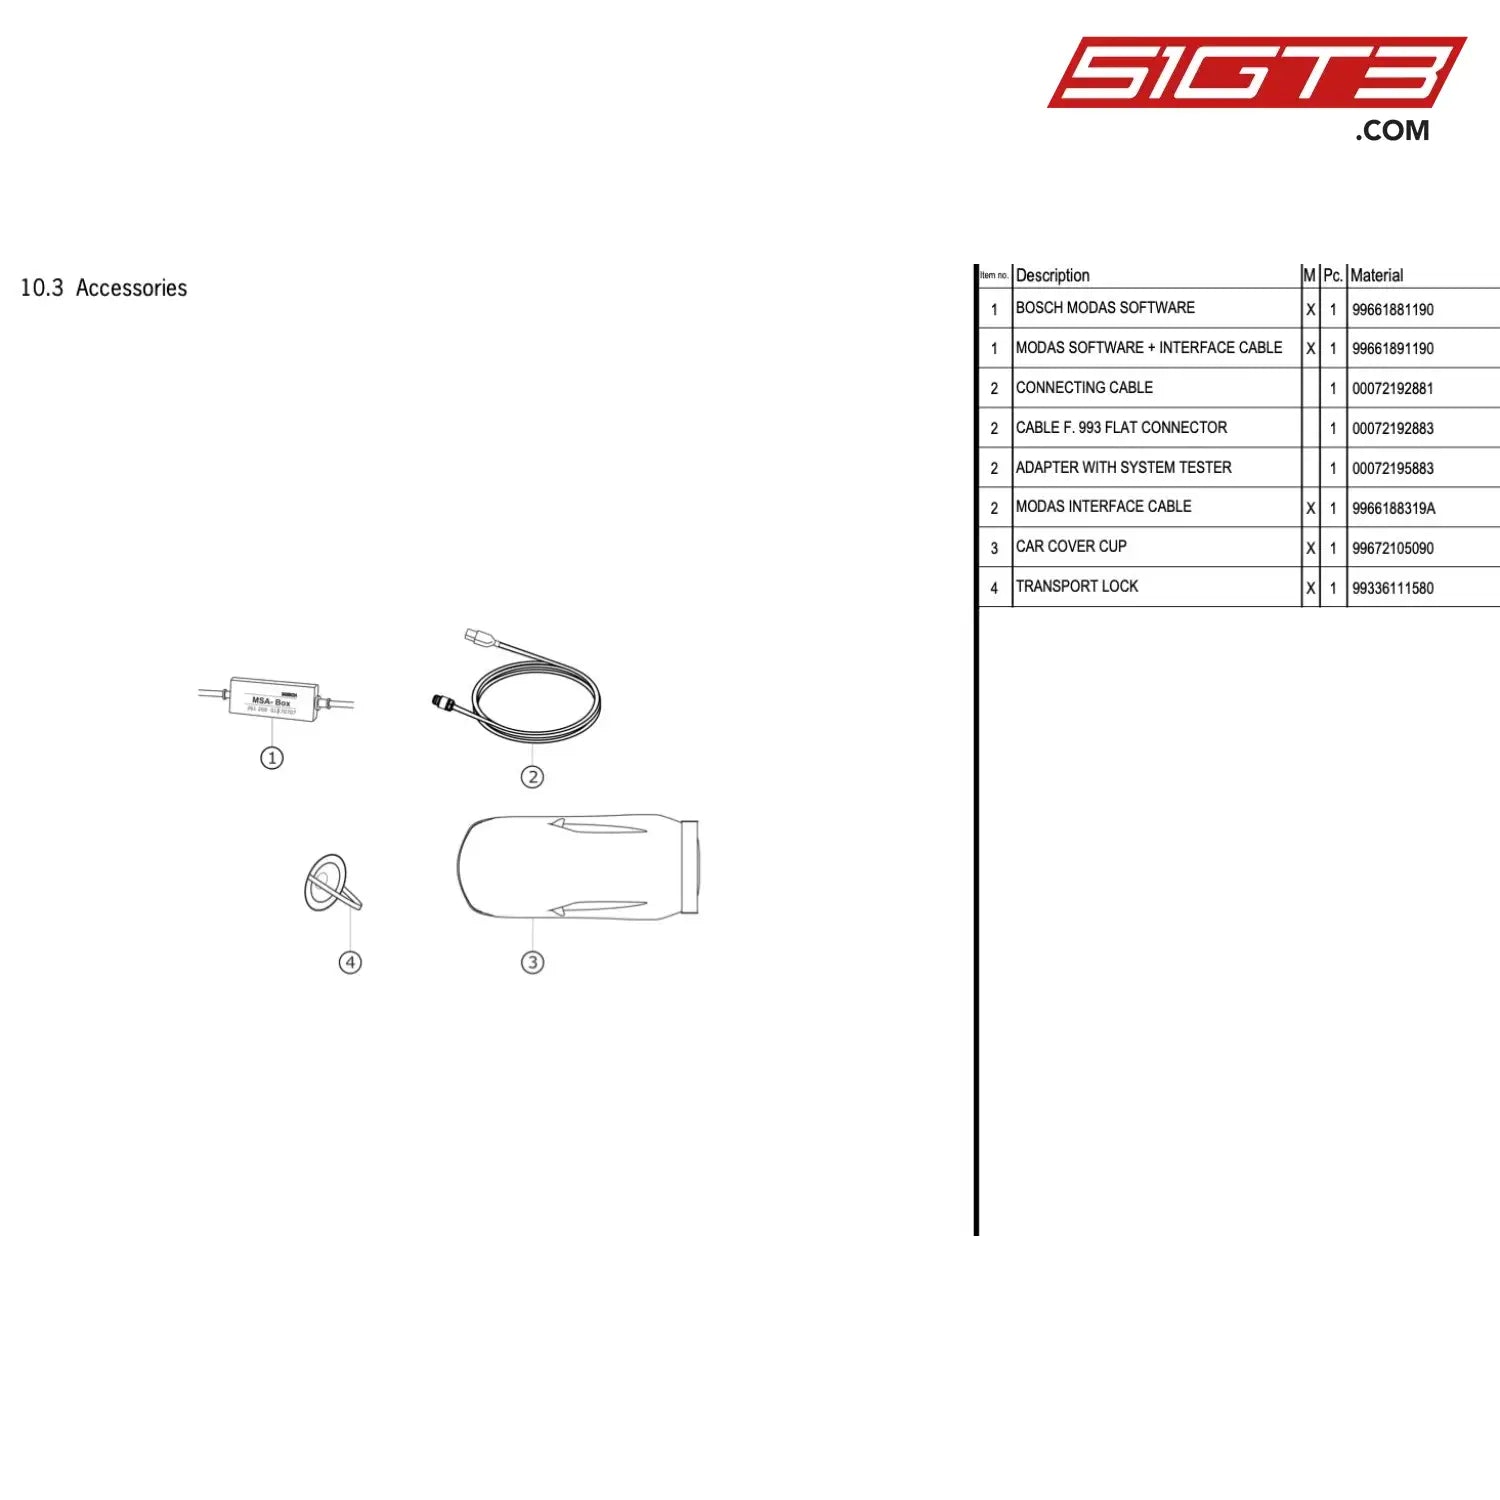 Cable F. 993 Flat Connector - 72192883 [Porsche 911 Gt3 Cup Type 996] Accessories